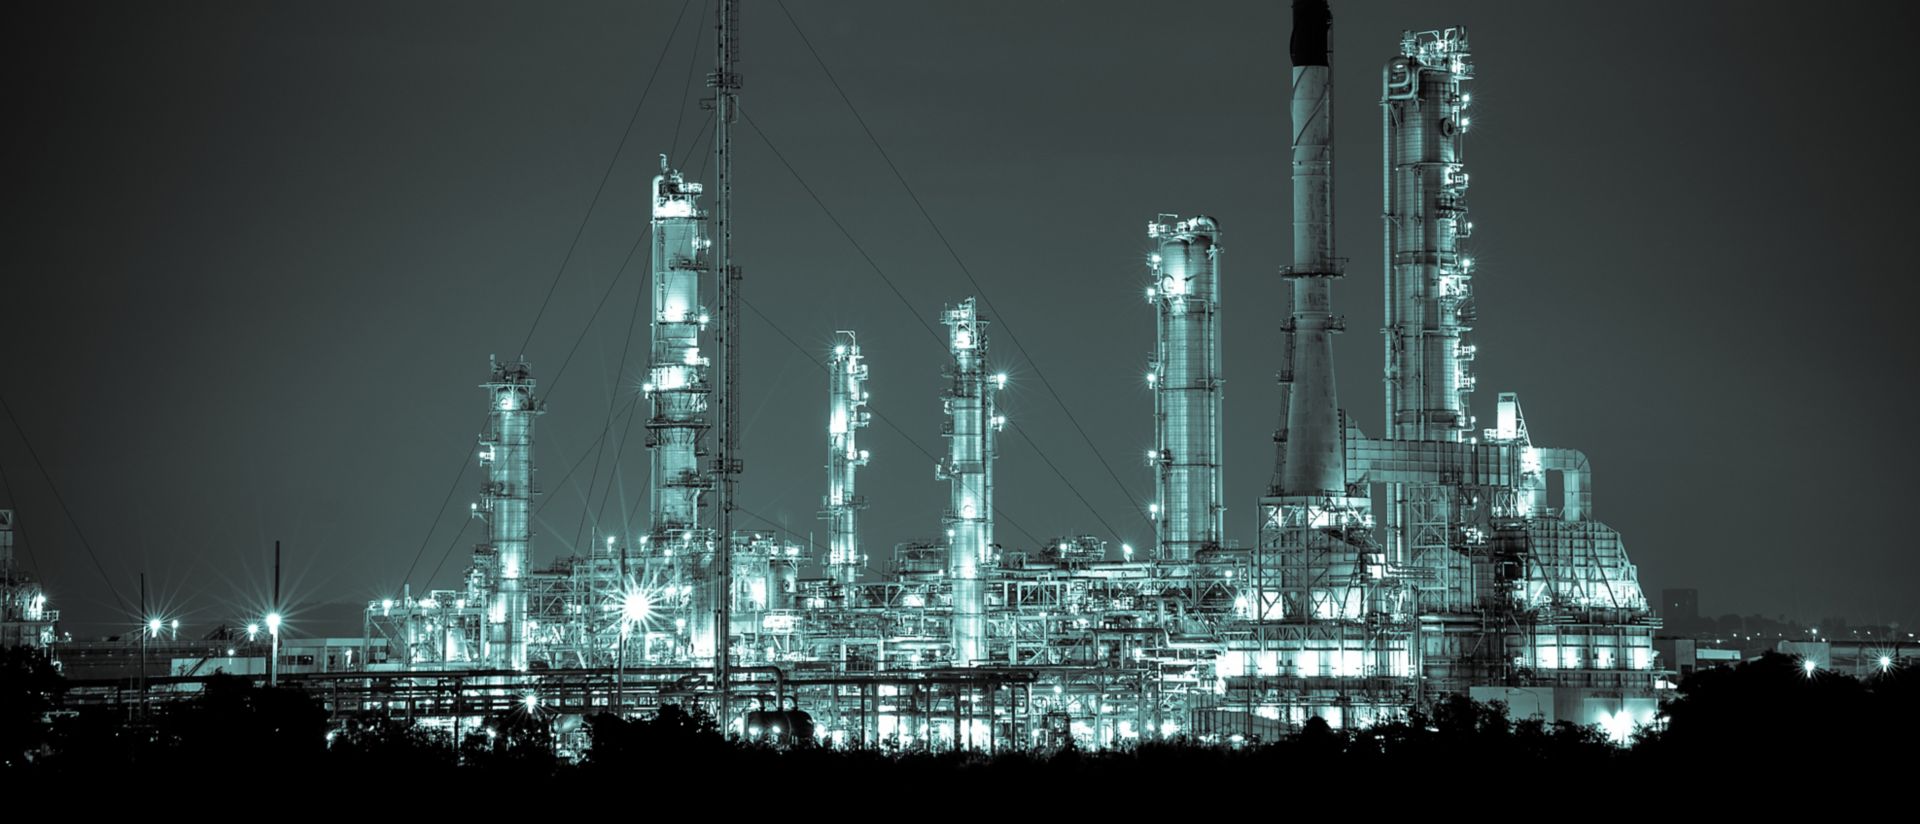 Oil refinery, chemical and petrochemical plant abstract at night